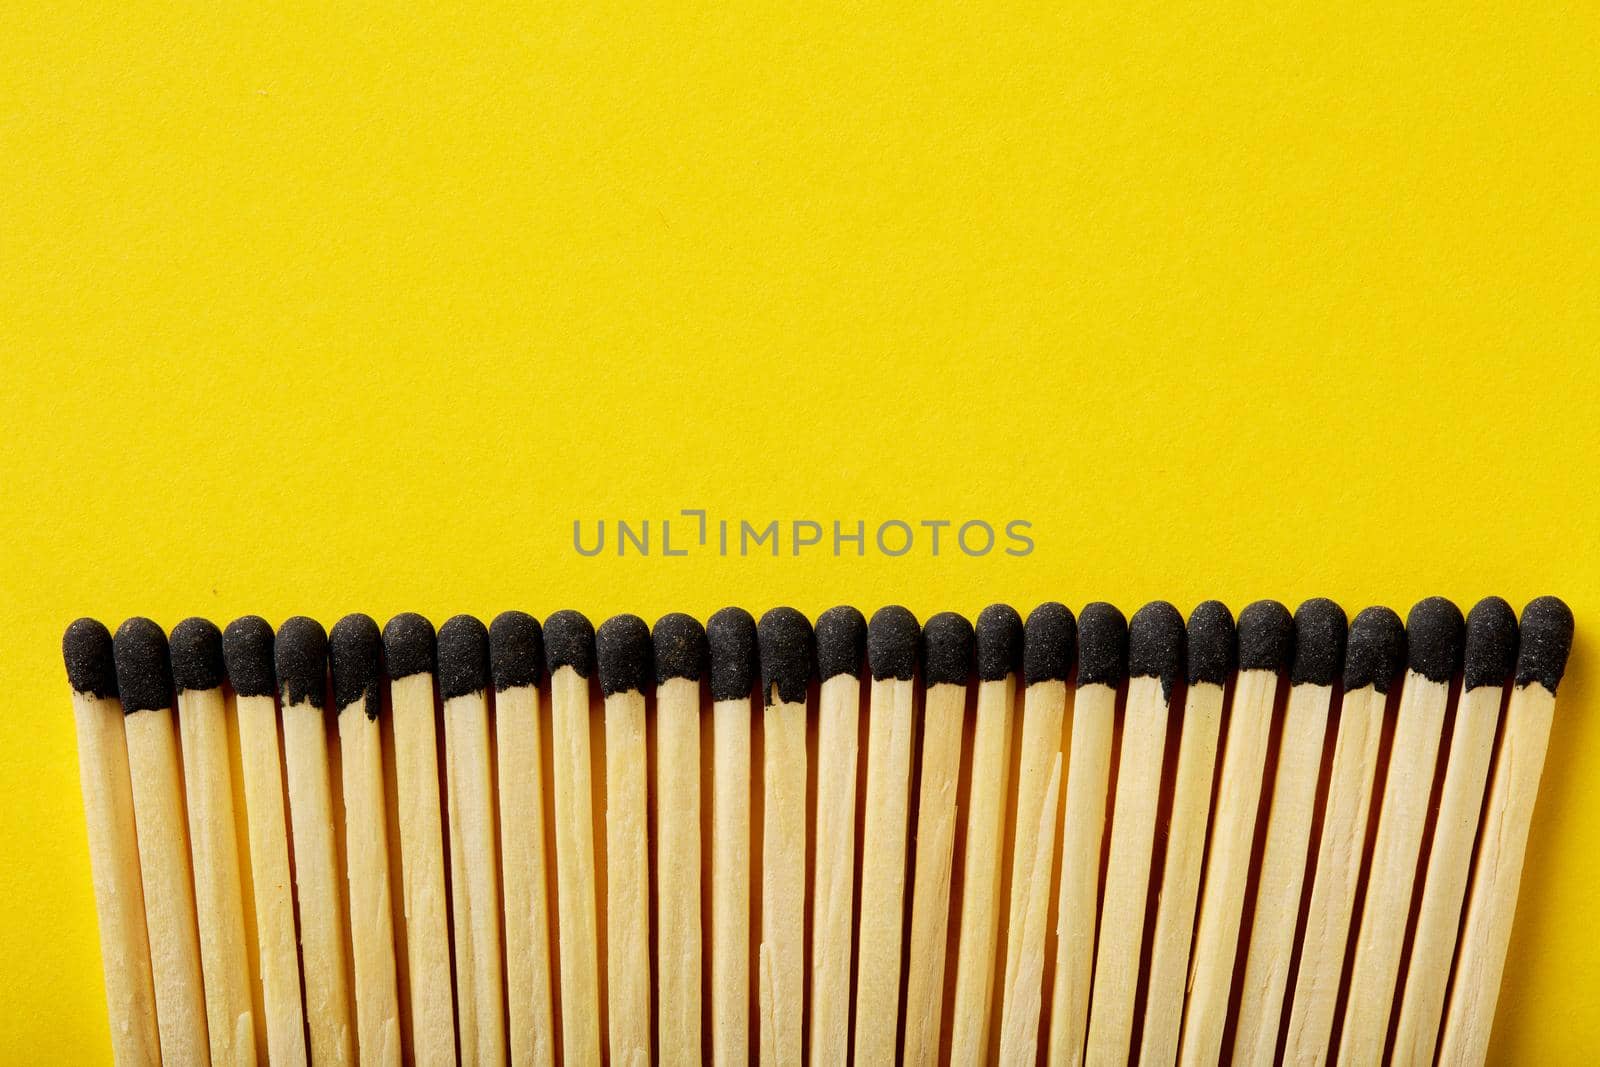 Matches on a yellow background, an abstraction about teamwork and modern relationships.